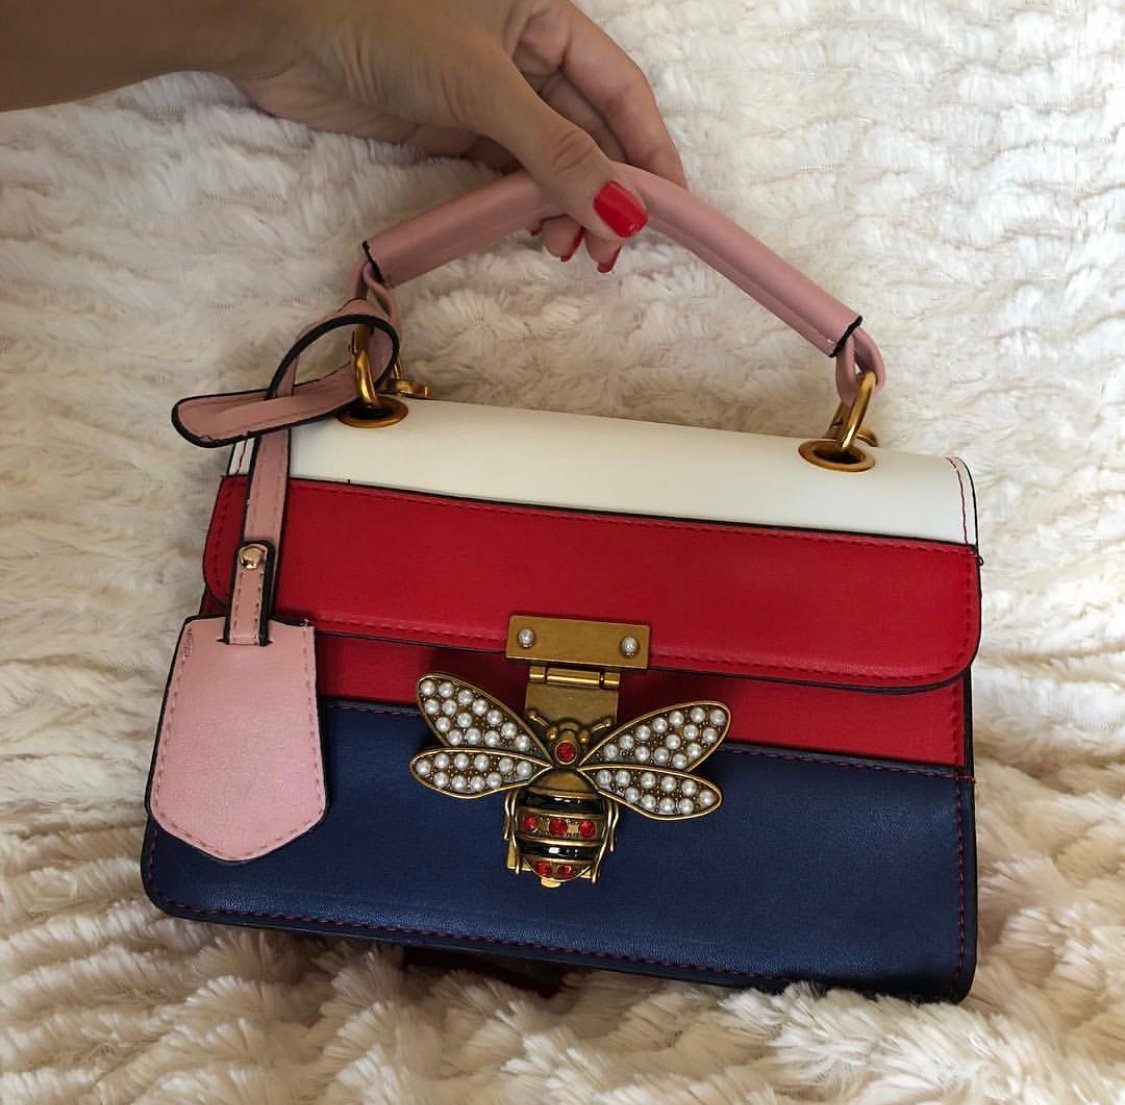 gucci inspired bag